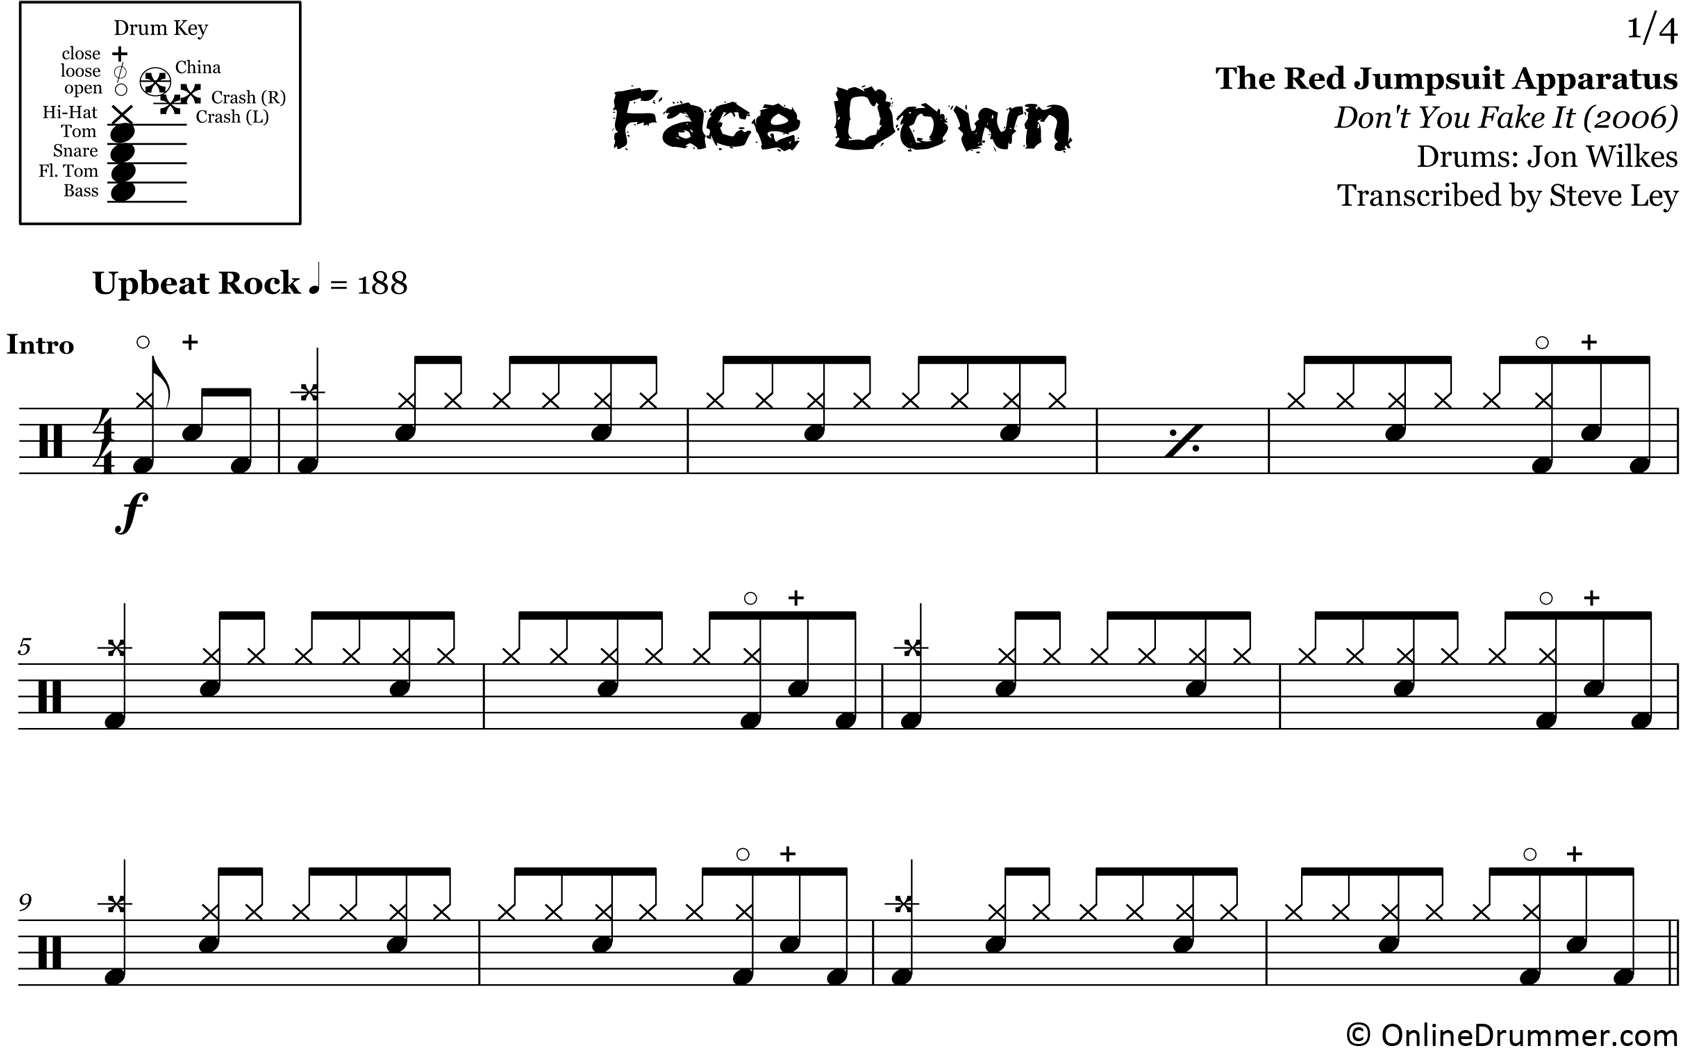 Face Down - The Red Jumpsuit Apparatus - Drum Sheet Music